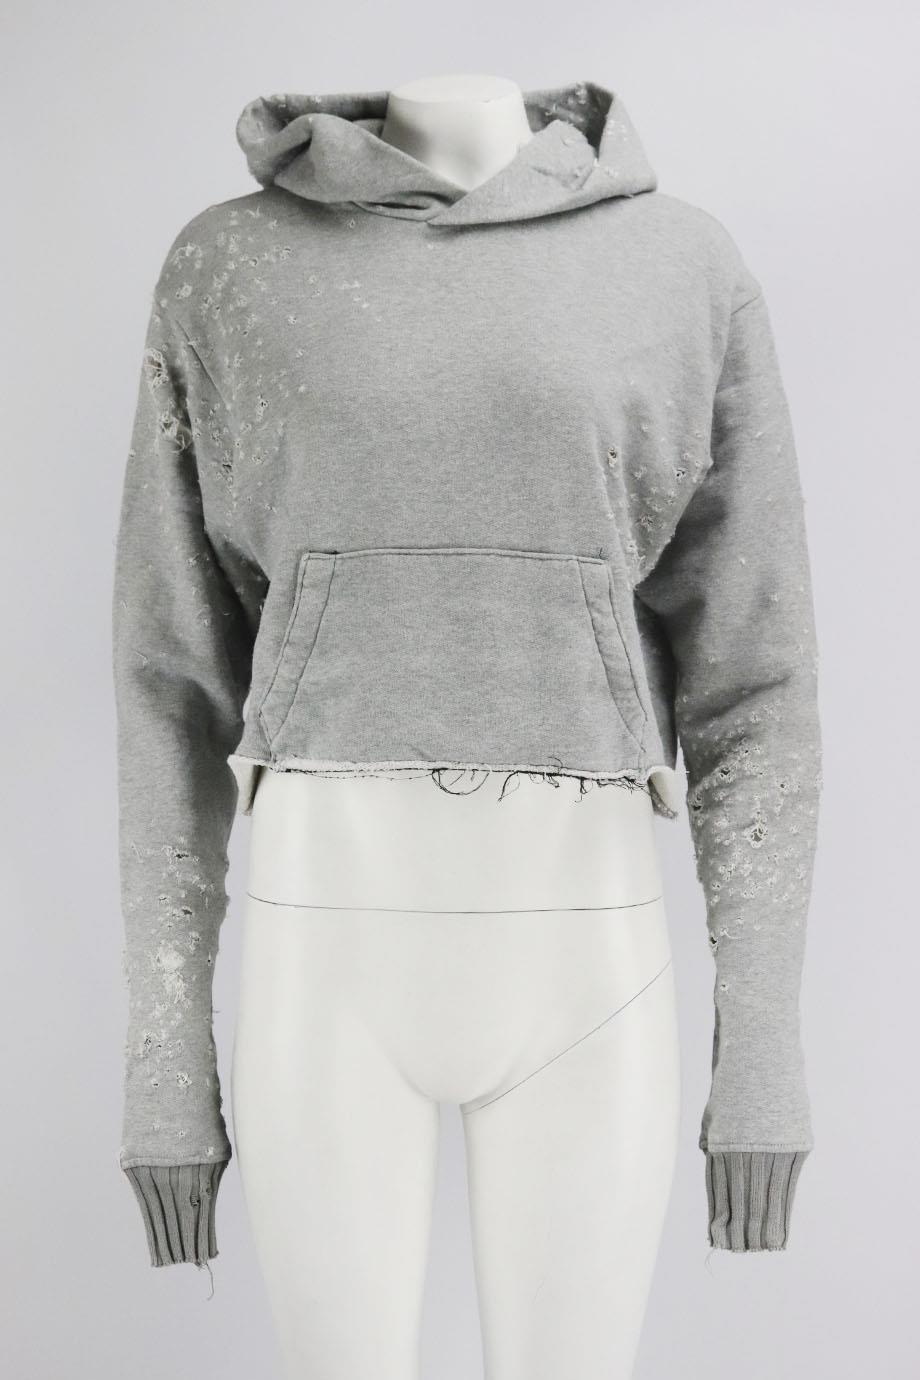 Amiri cropped distressed cotton and cashmere blend hoodie. Grey. Long sleeve, crewneck. Slips on. 100% Cotton; fabric2: 90% Cotton, 10% Cashmere. Size: Small (UK 8, US 4, FR 36, IT 40). Bust 45 in. Waist: 44 in. Hips: 44 in. Length: 17 in Very good